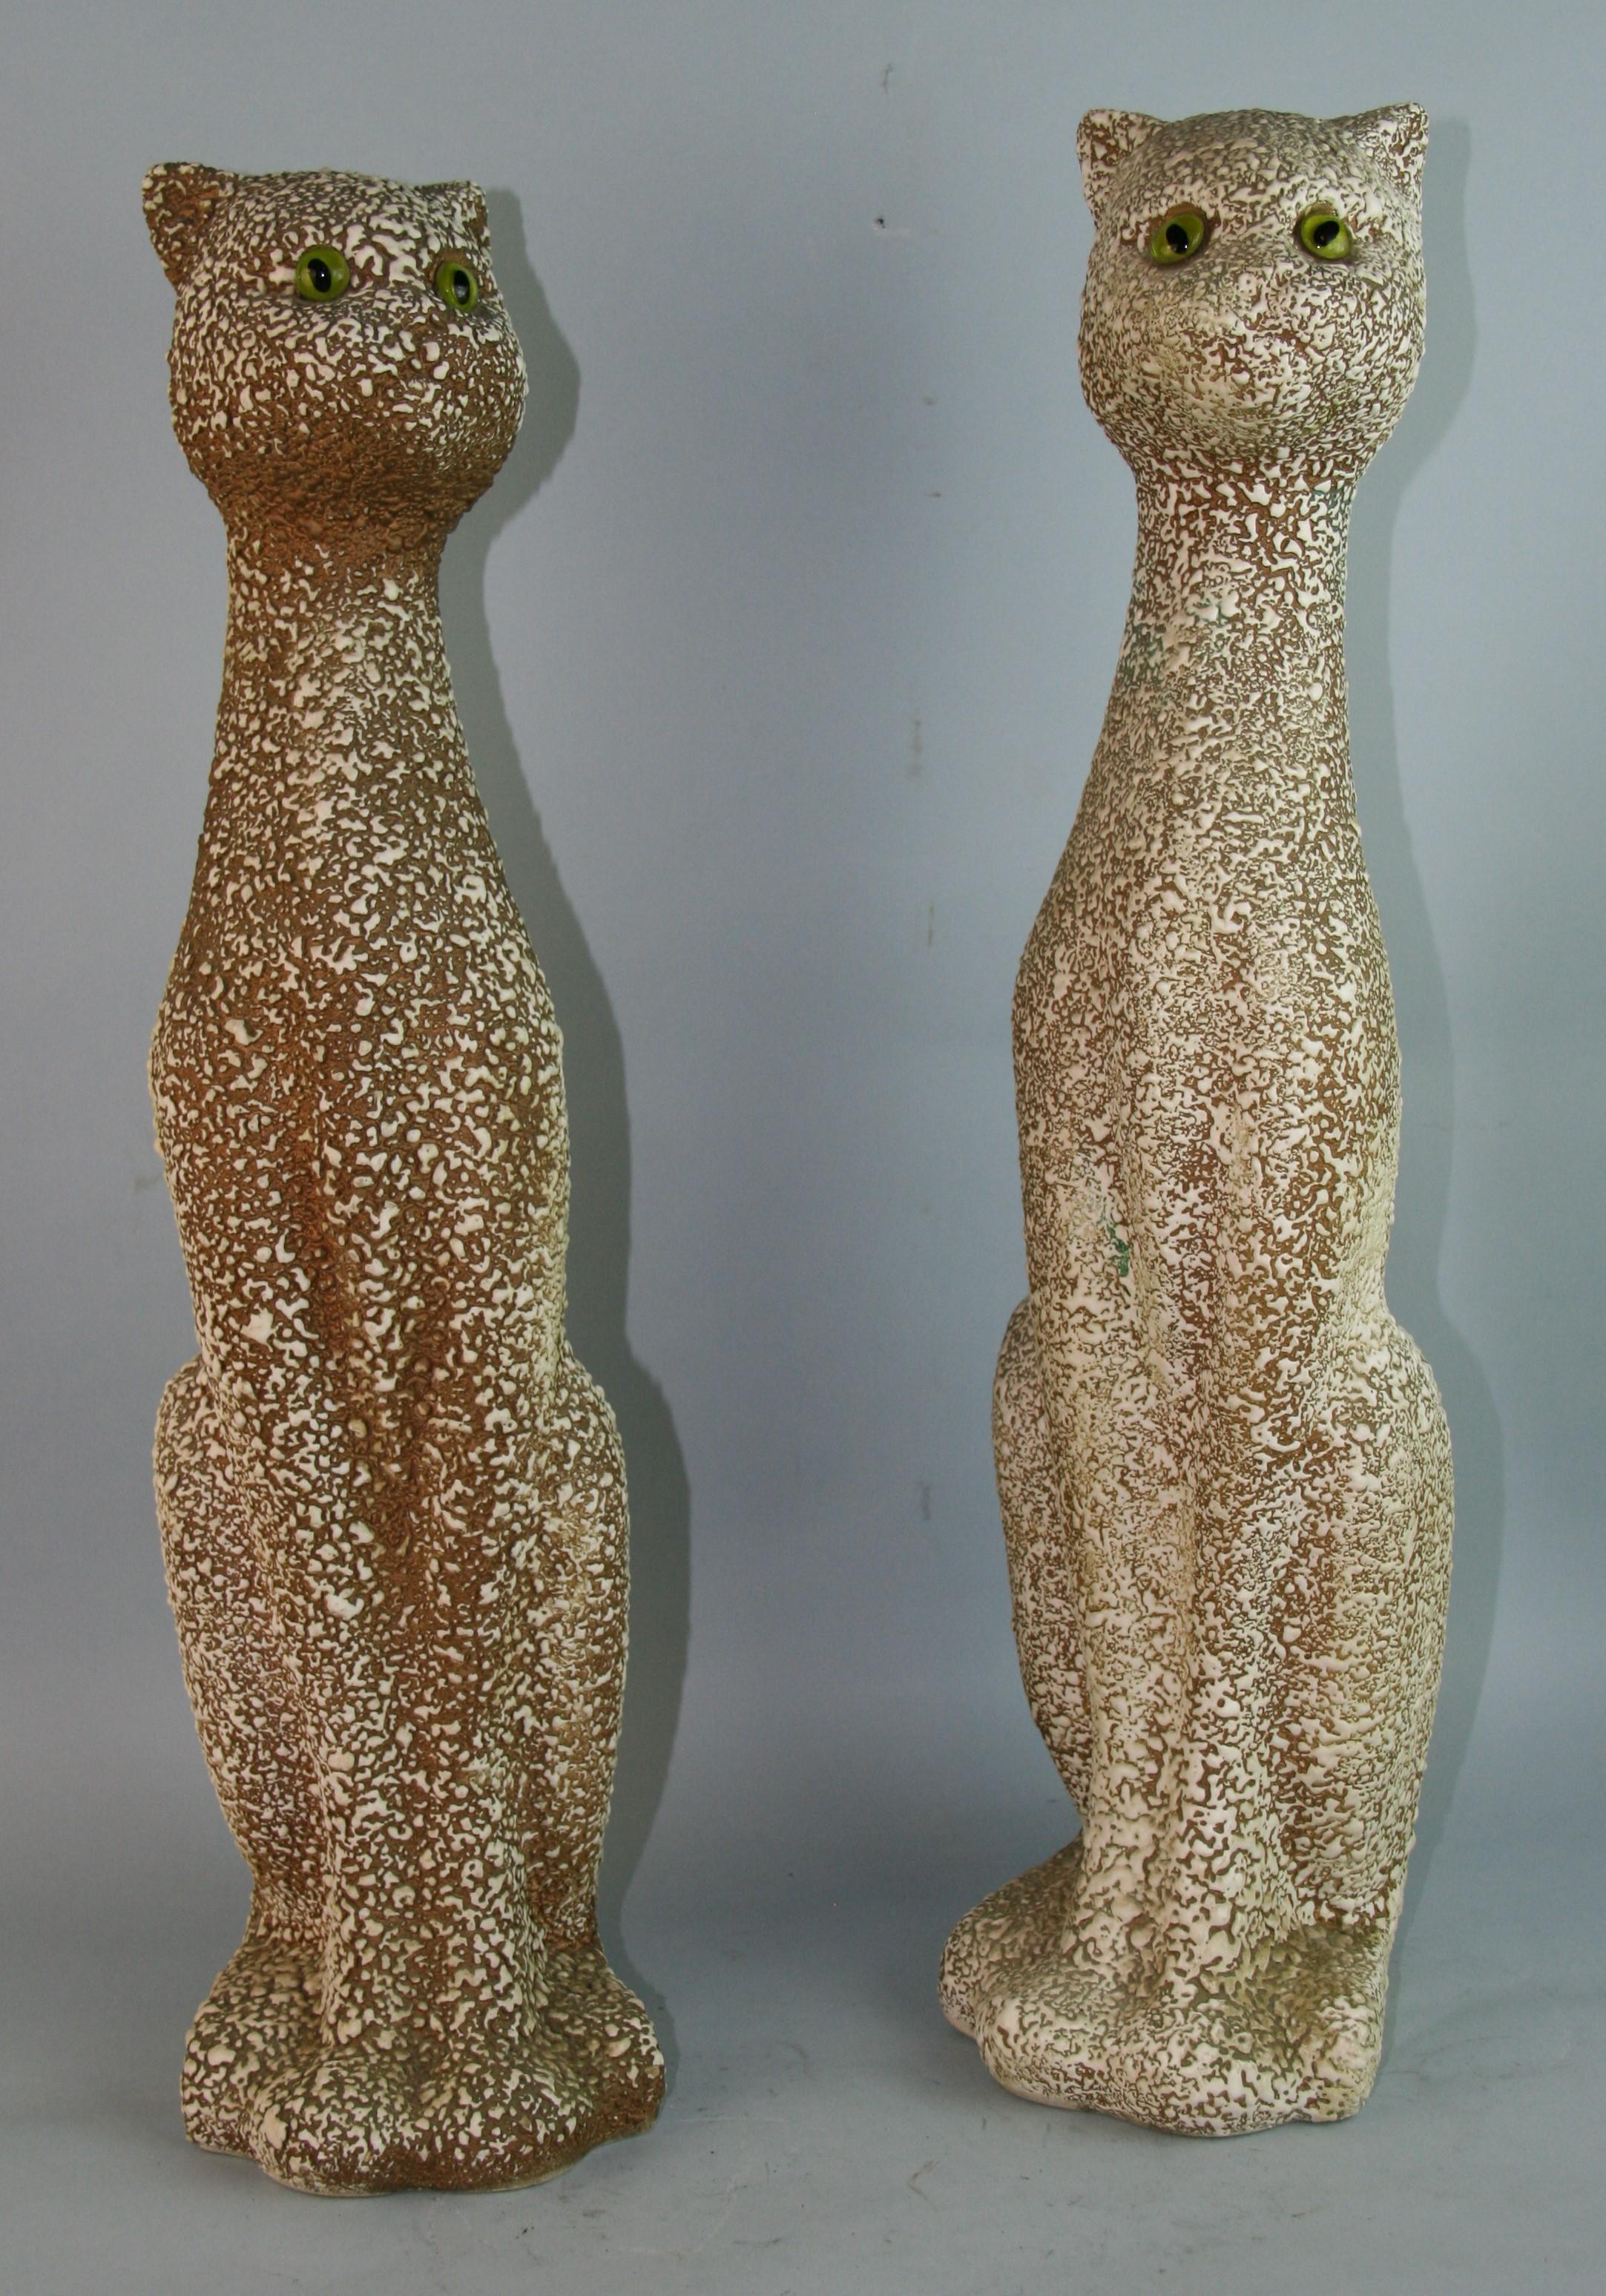 1160 Pair oversized matched pair one cream the other light brown French ceramic cat sculptures with glass eyes